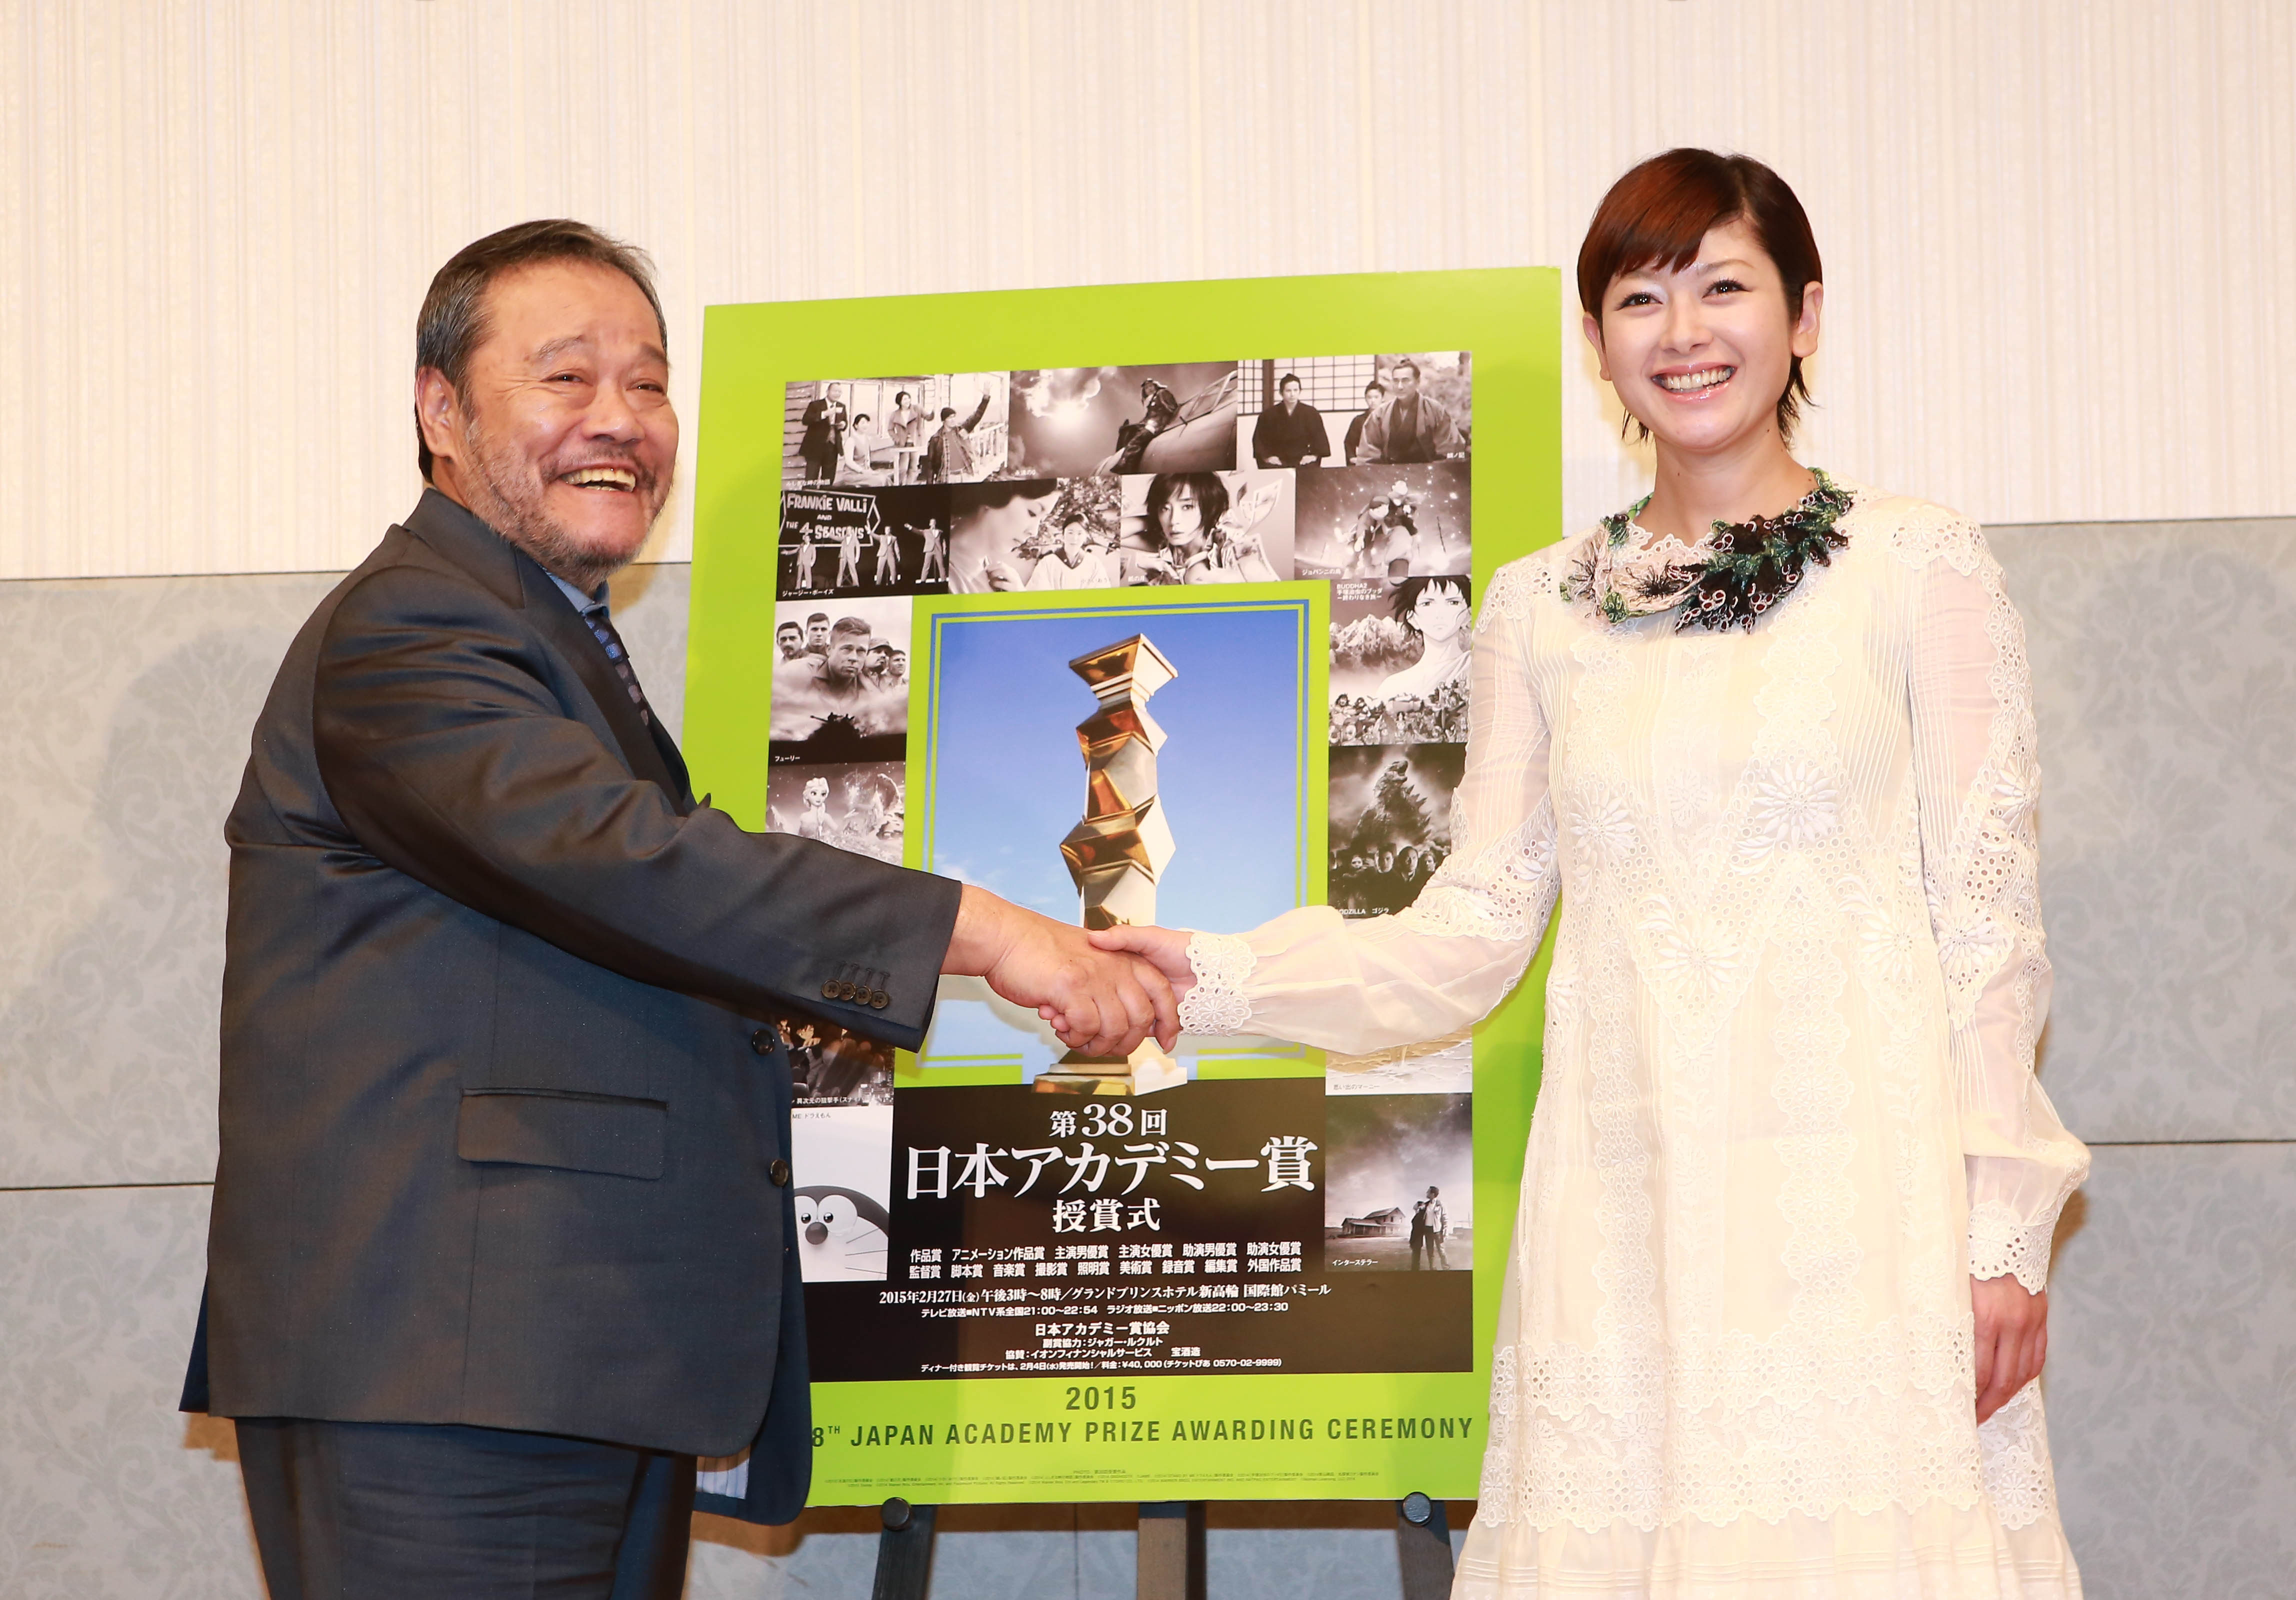 It's a deal: Actors Toshiyuki Nishida and Yoko Maki &#8212; presenters for the 38th Japan Academy prizes &#8212; shake hands at a press conference ahead of the ceremony. The Japan Academy has recently come under fire from director Takeshi Kitano for its biases. | &#169; 2015 'SAIHATE NITE' SEISAKU IINKAI